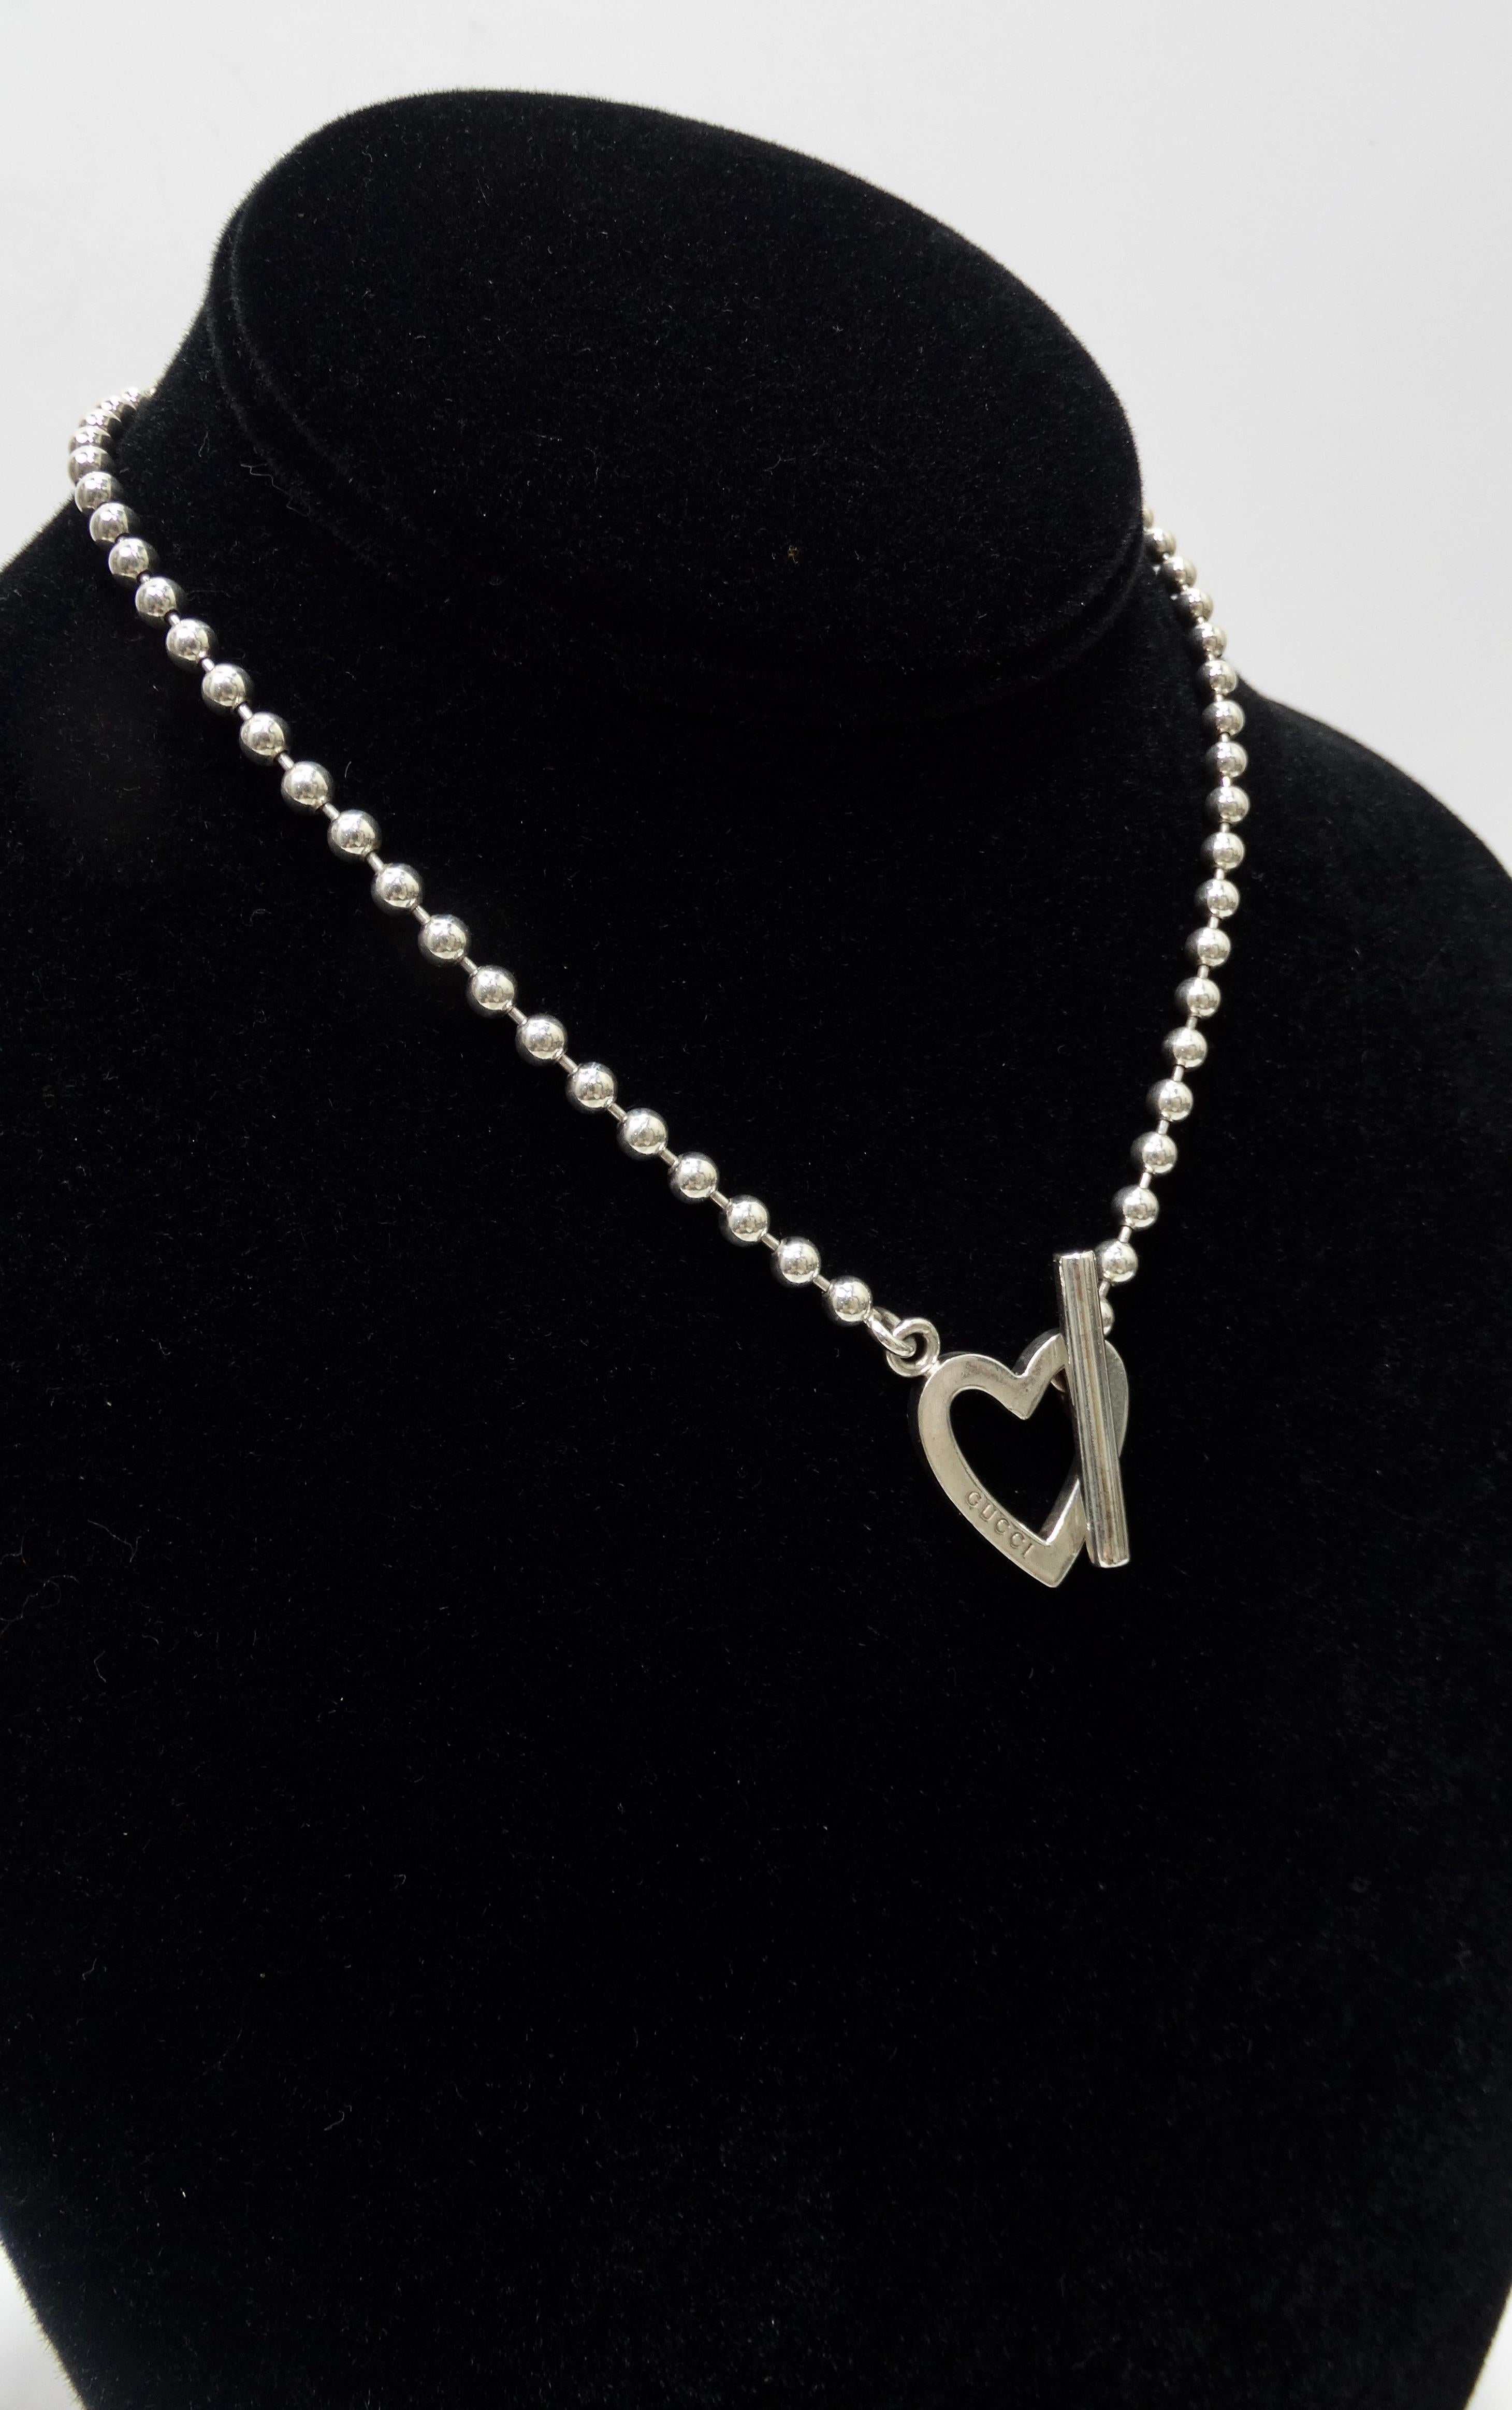 Show your love for Gucci with this adorable necklace! Circa 21st century, this genuine silver Gucci Heart necklace is the perfect addition to any Gucci collector's collection. Necklace features a boule chain with an open heart toggle closure.